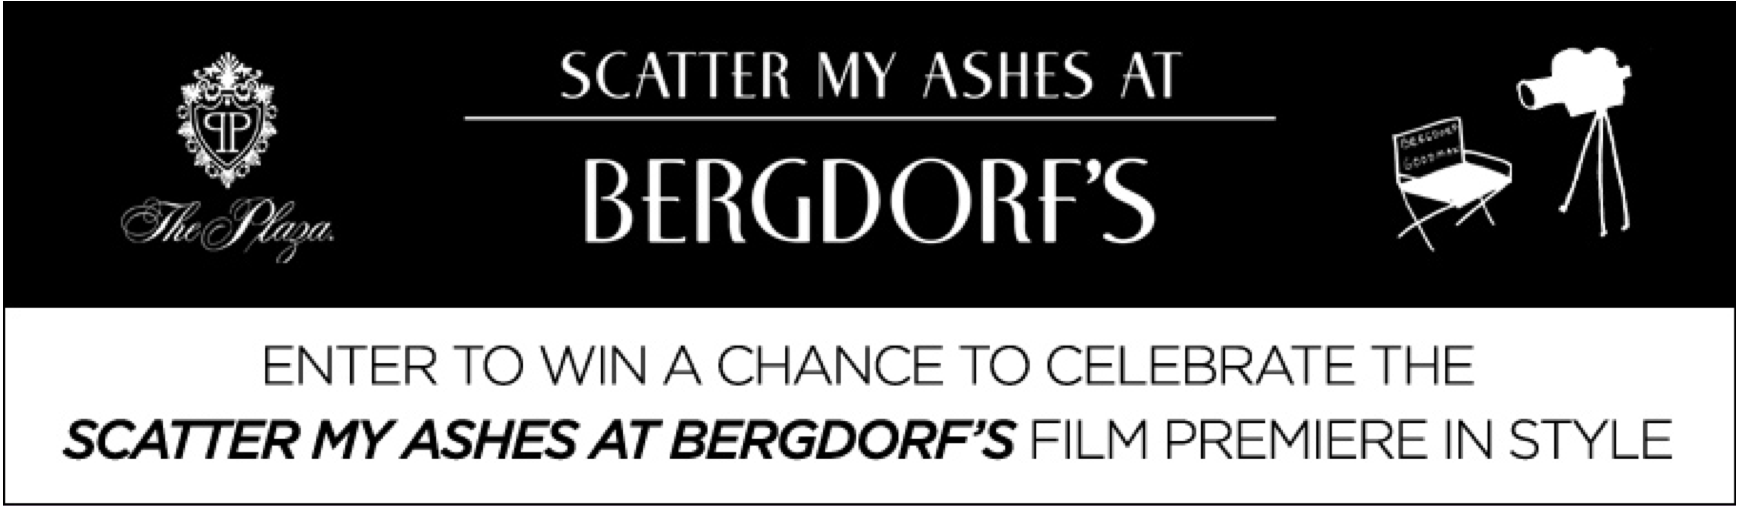 Scatter My Ashes at Bergdorfs 